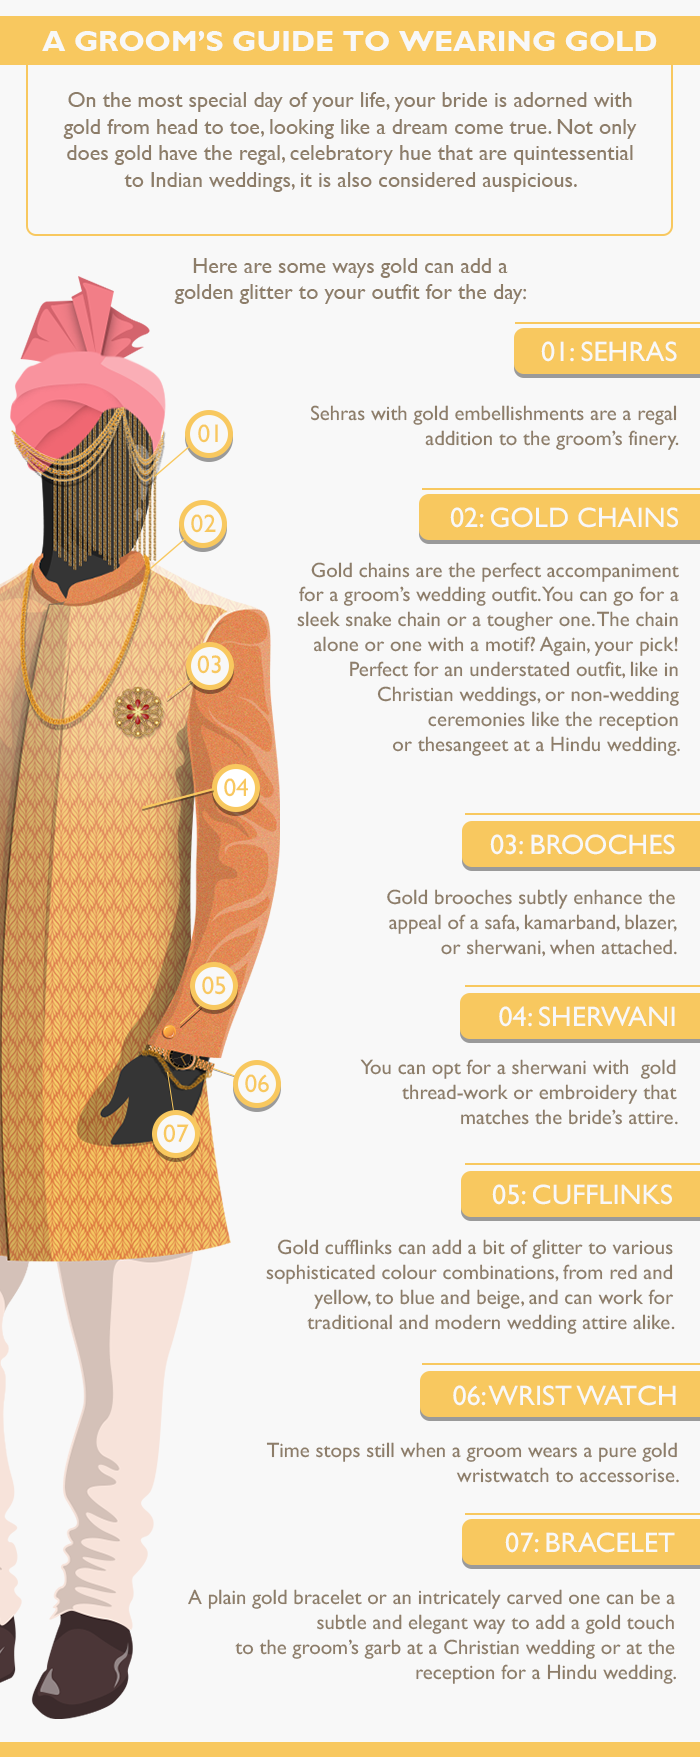 Gold jewellery is also worn by grooms in India to add glitter to the wedding outfit . Take a look at various gold jewellery options which grooms can consider to add appeal to their outfit.